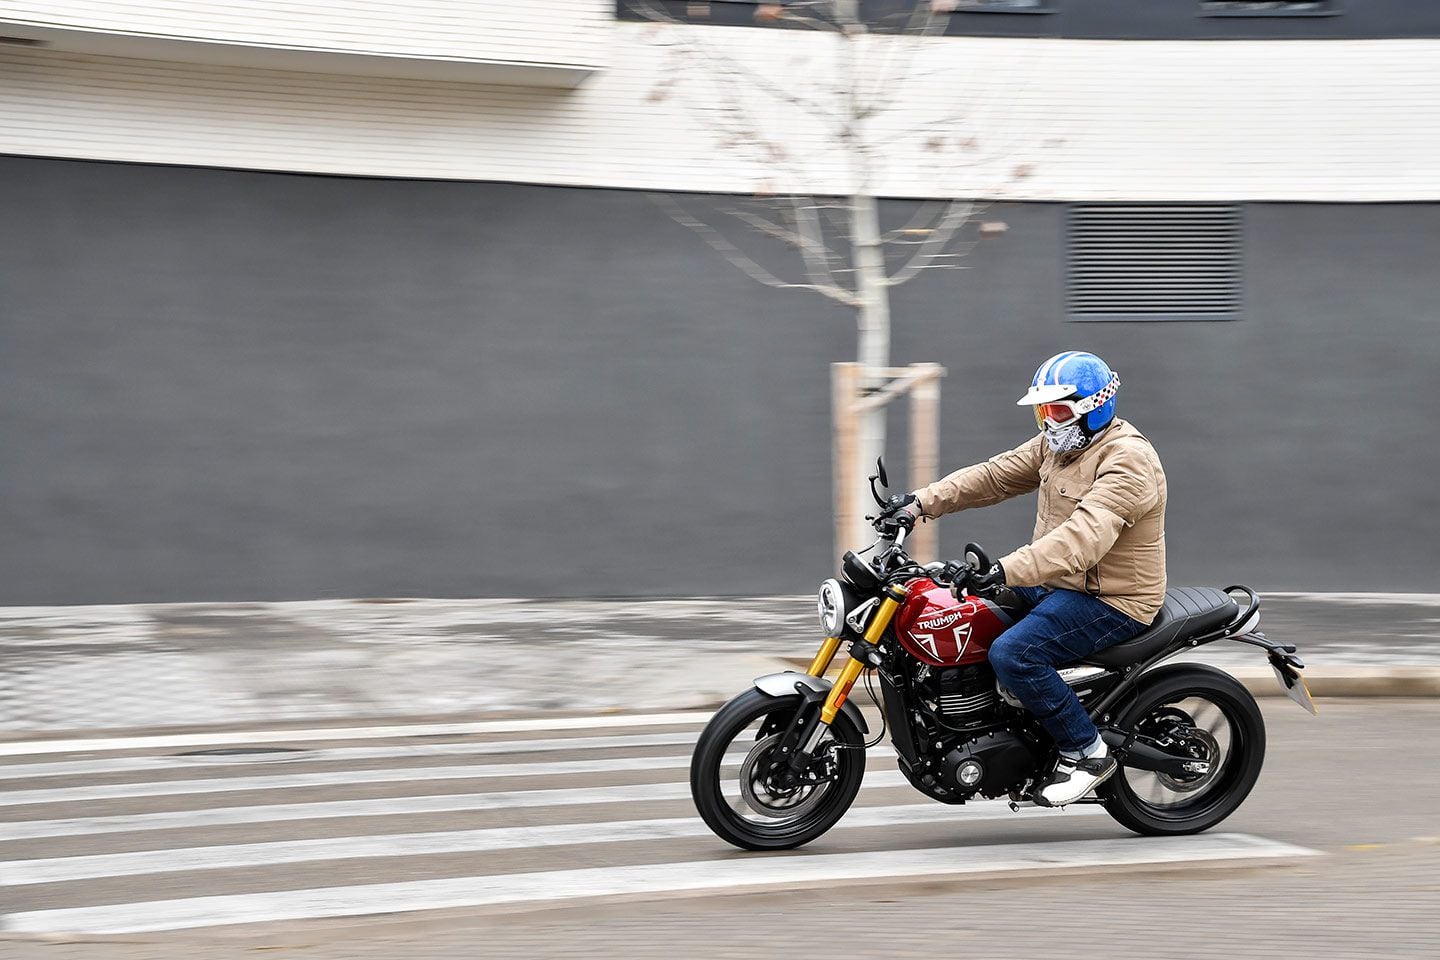 The Speed 400 is not too sporty to be comfortable on the city streets.